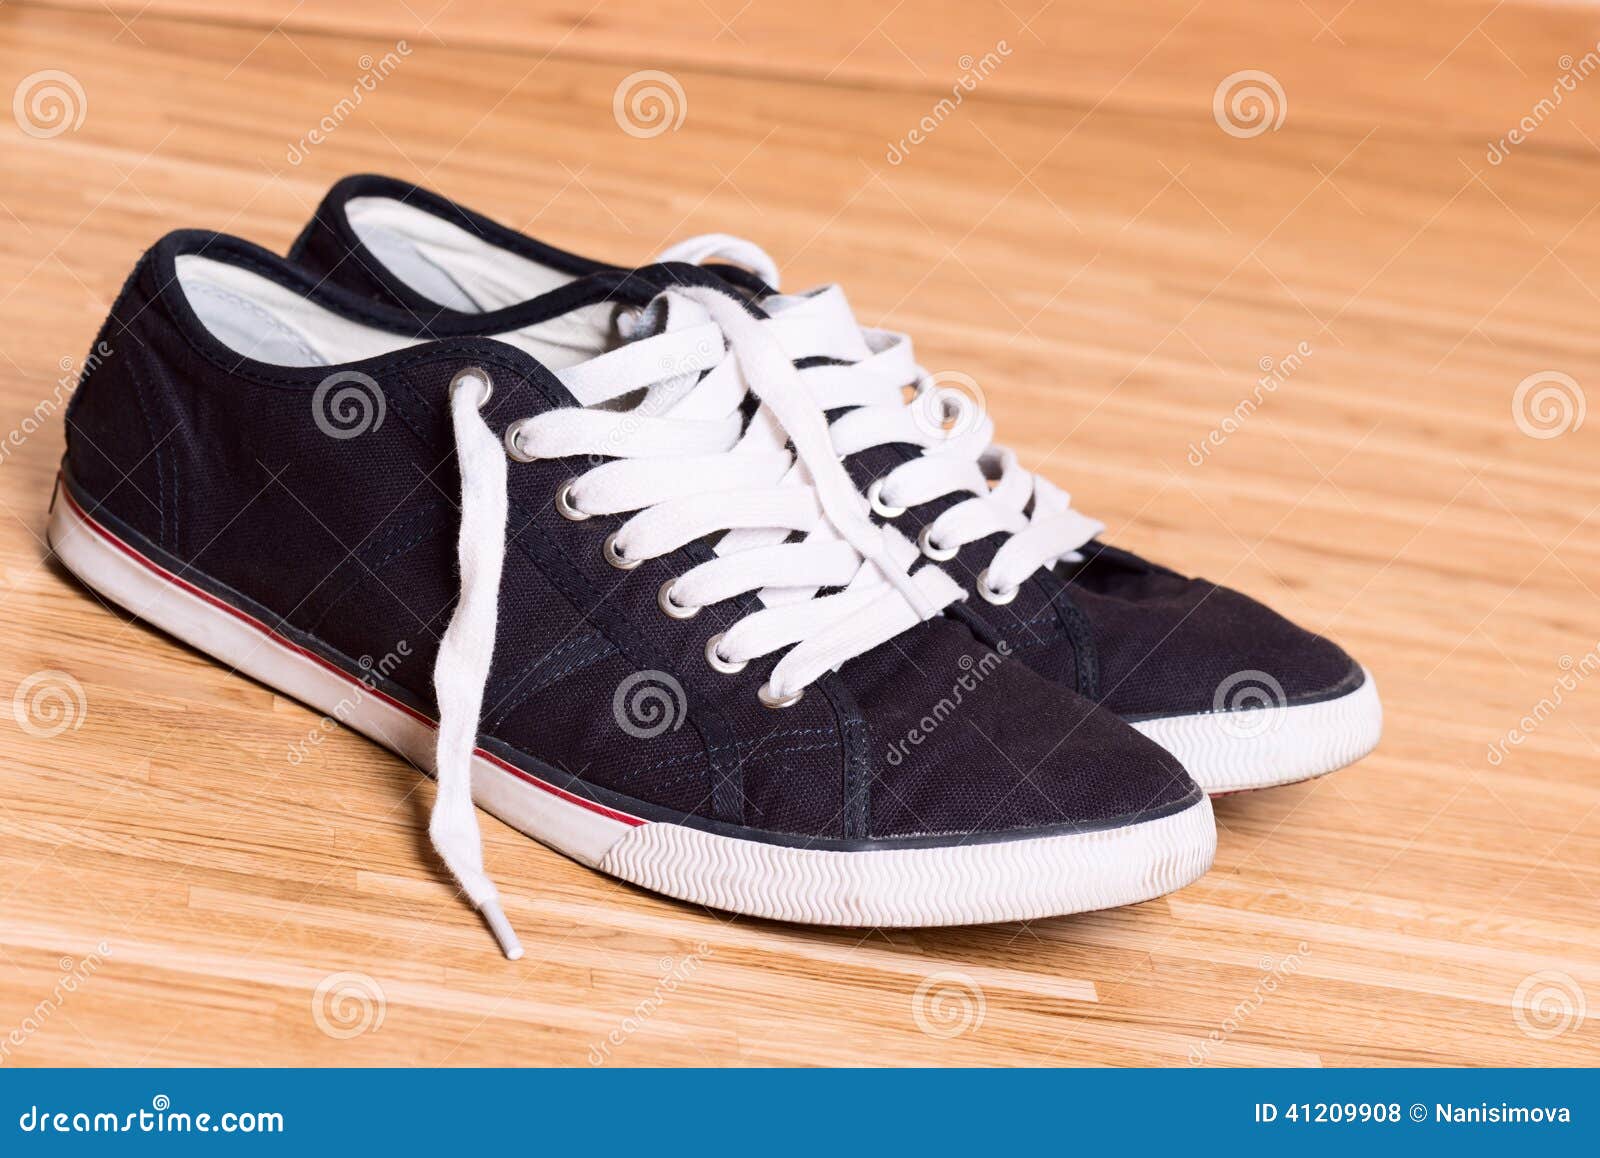 Mans Blue Sneakers Close Up Stock Photo - Image of sneakers, lace: 41209908